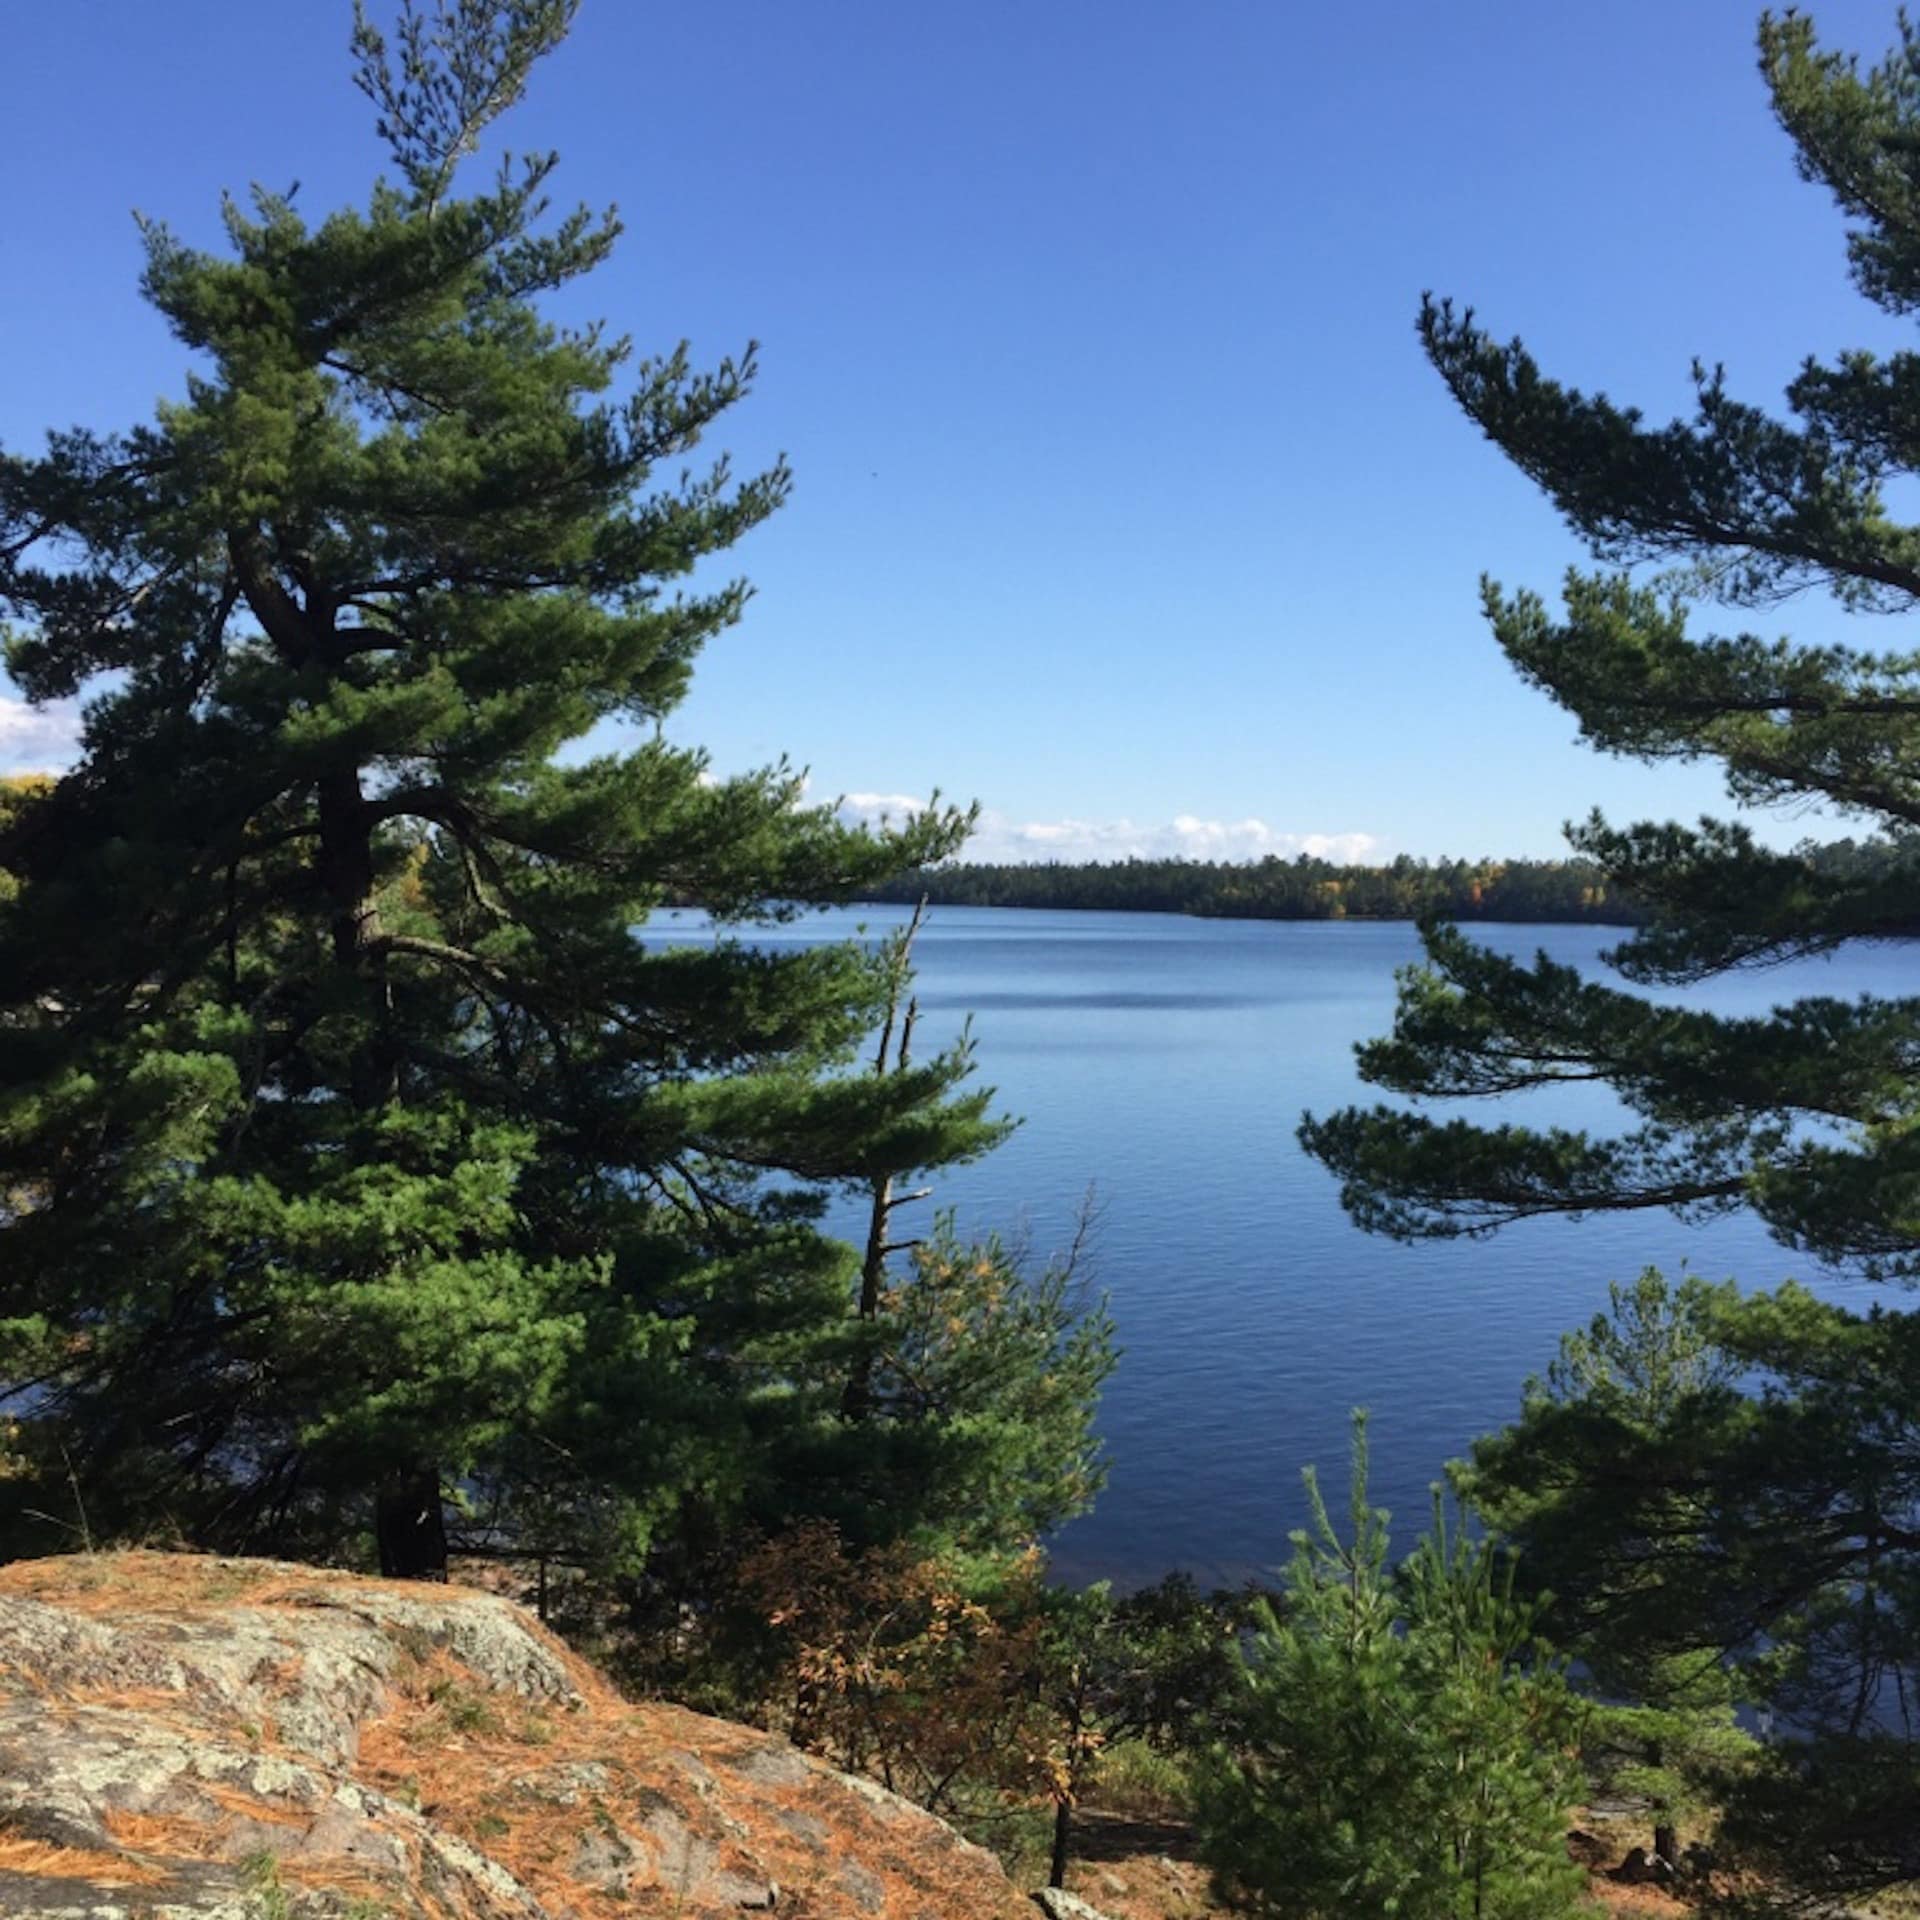 A view of Rainy Lake from its wooded shoreline